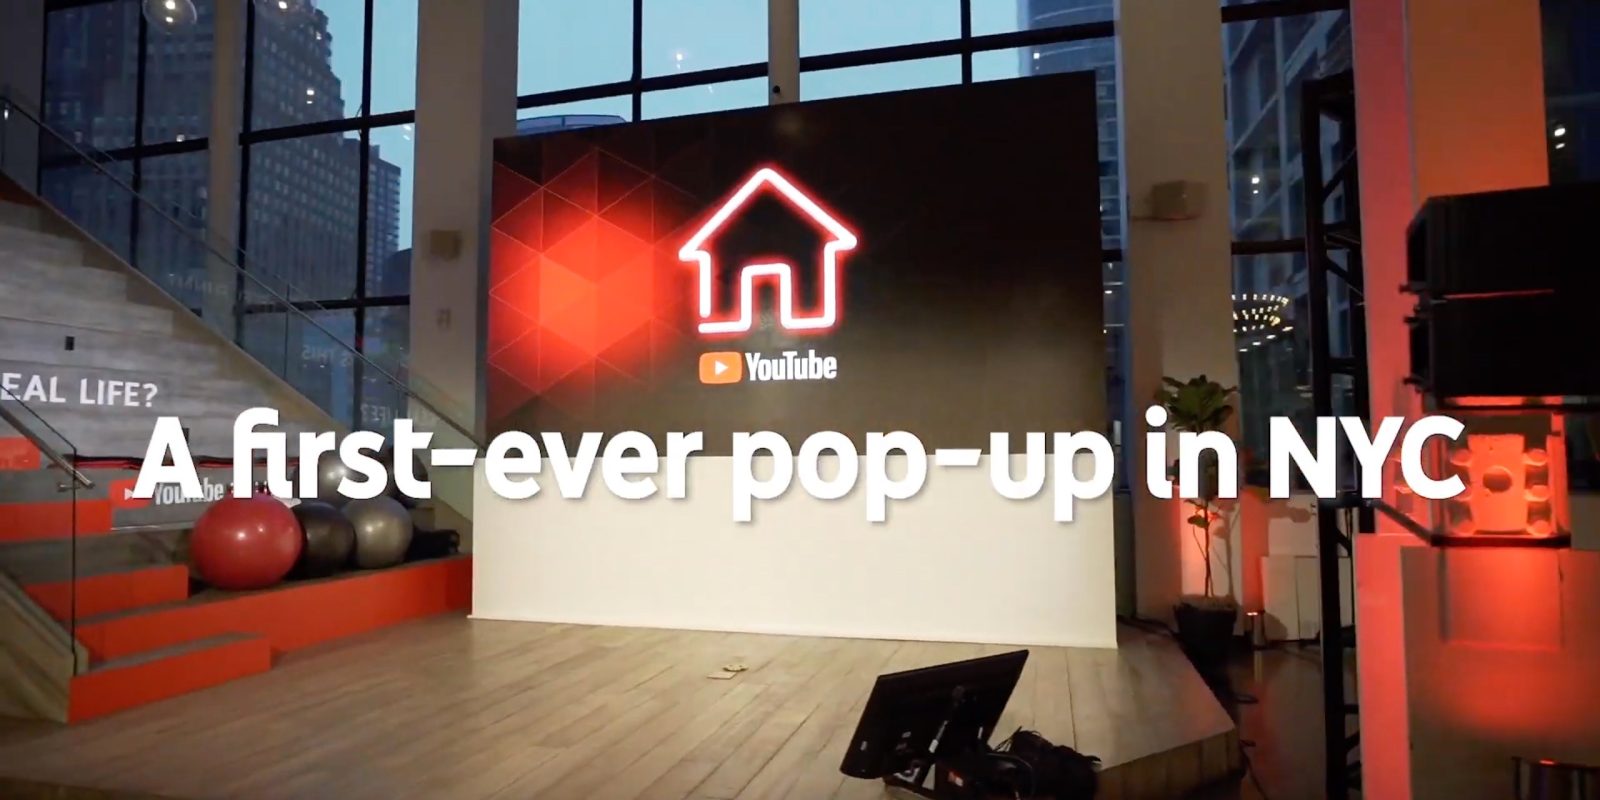 YouTube House pop-up NYC